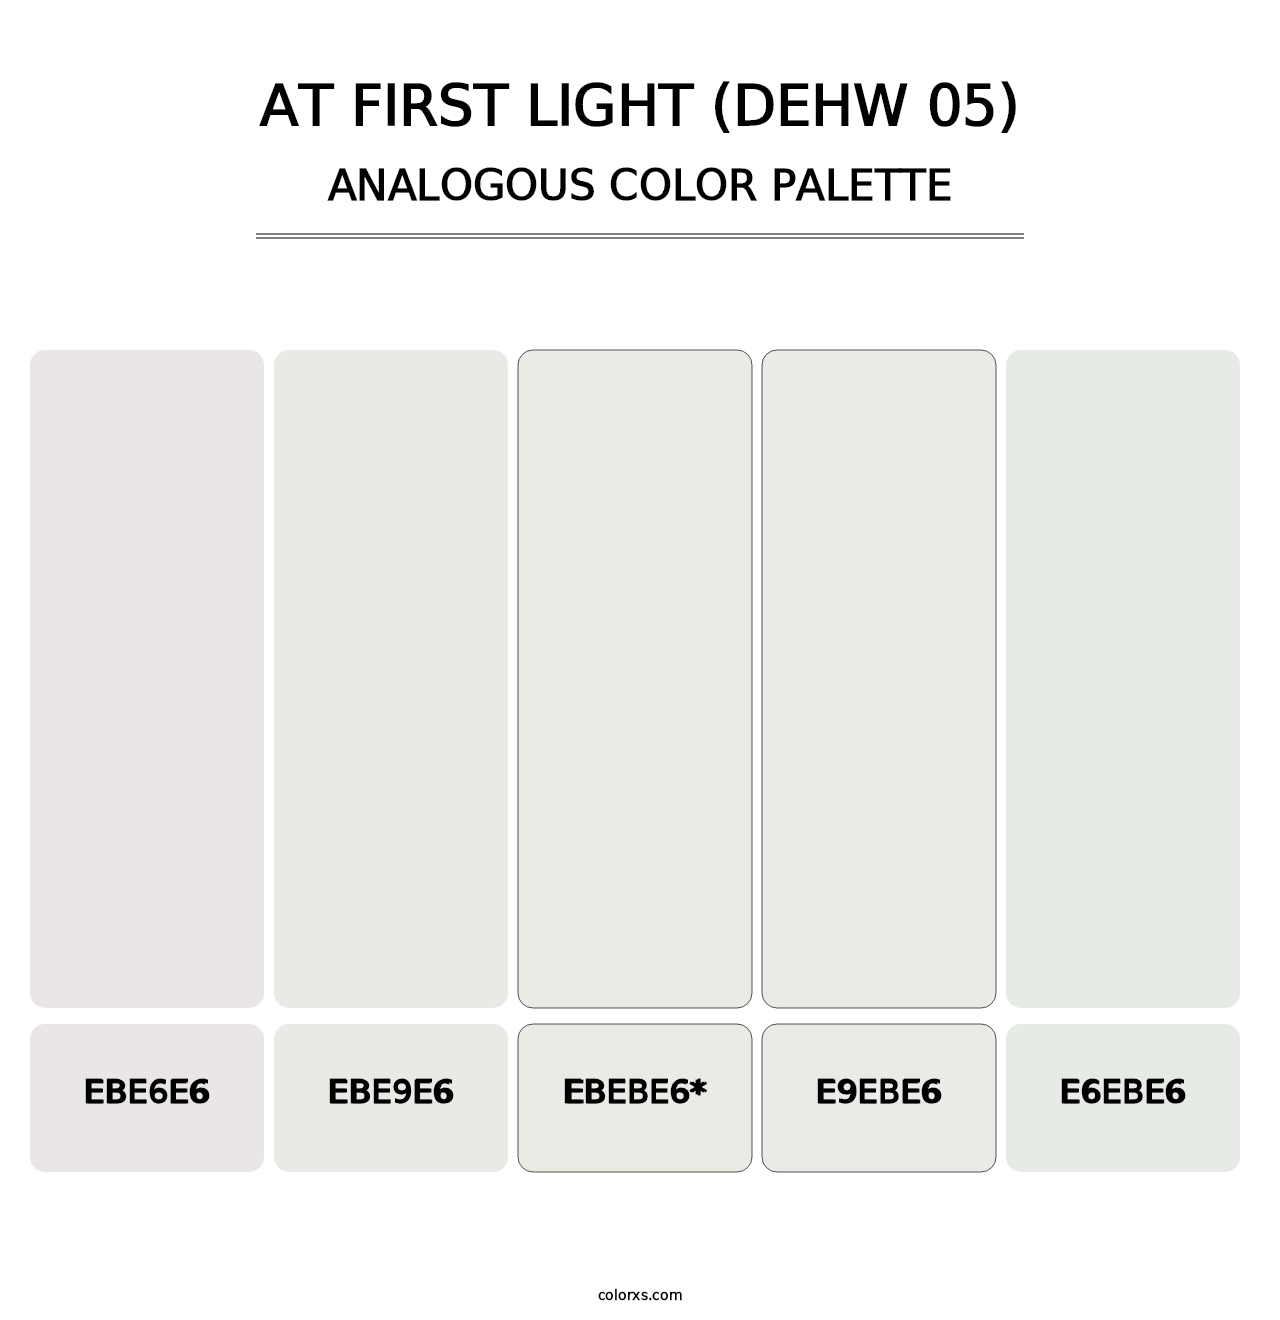 At First Light (DEHW 05) - Analogous Color Palette